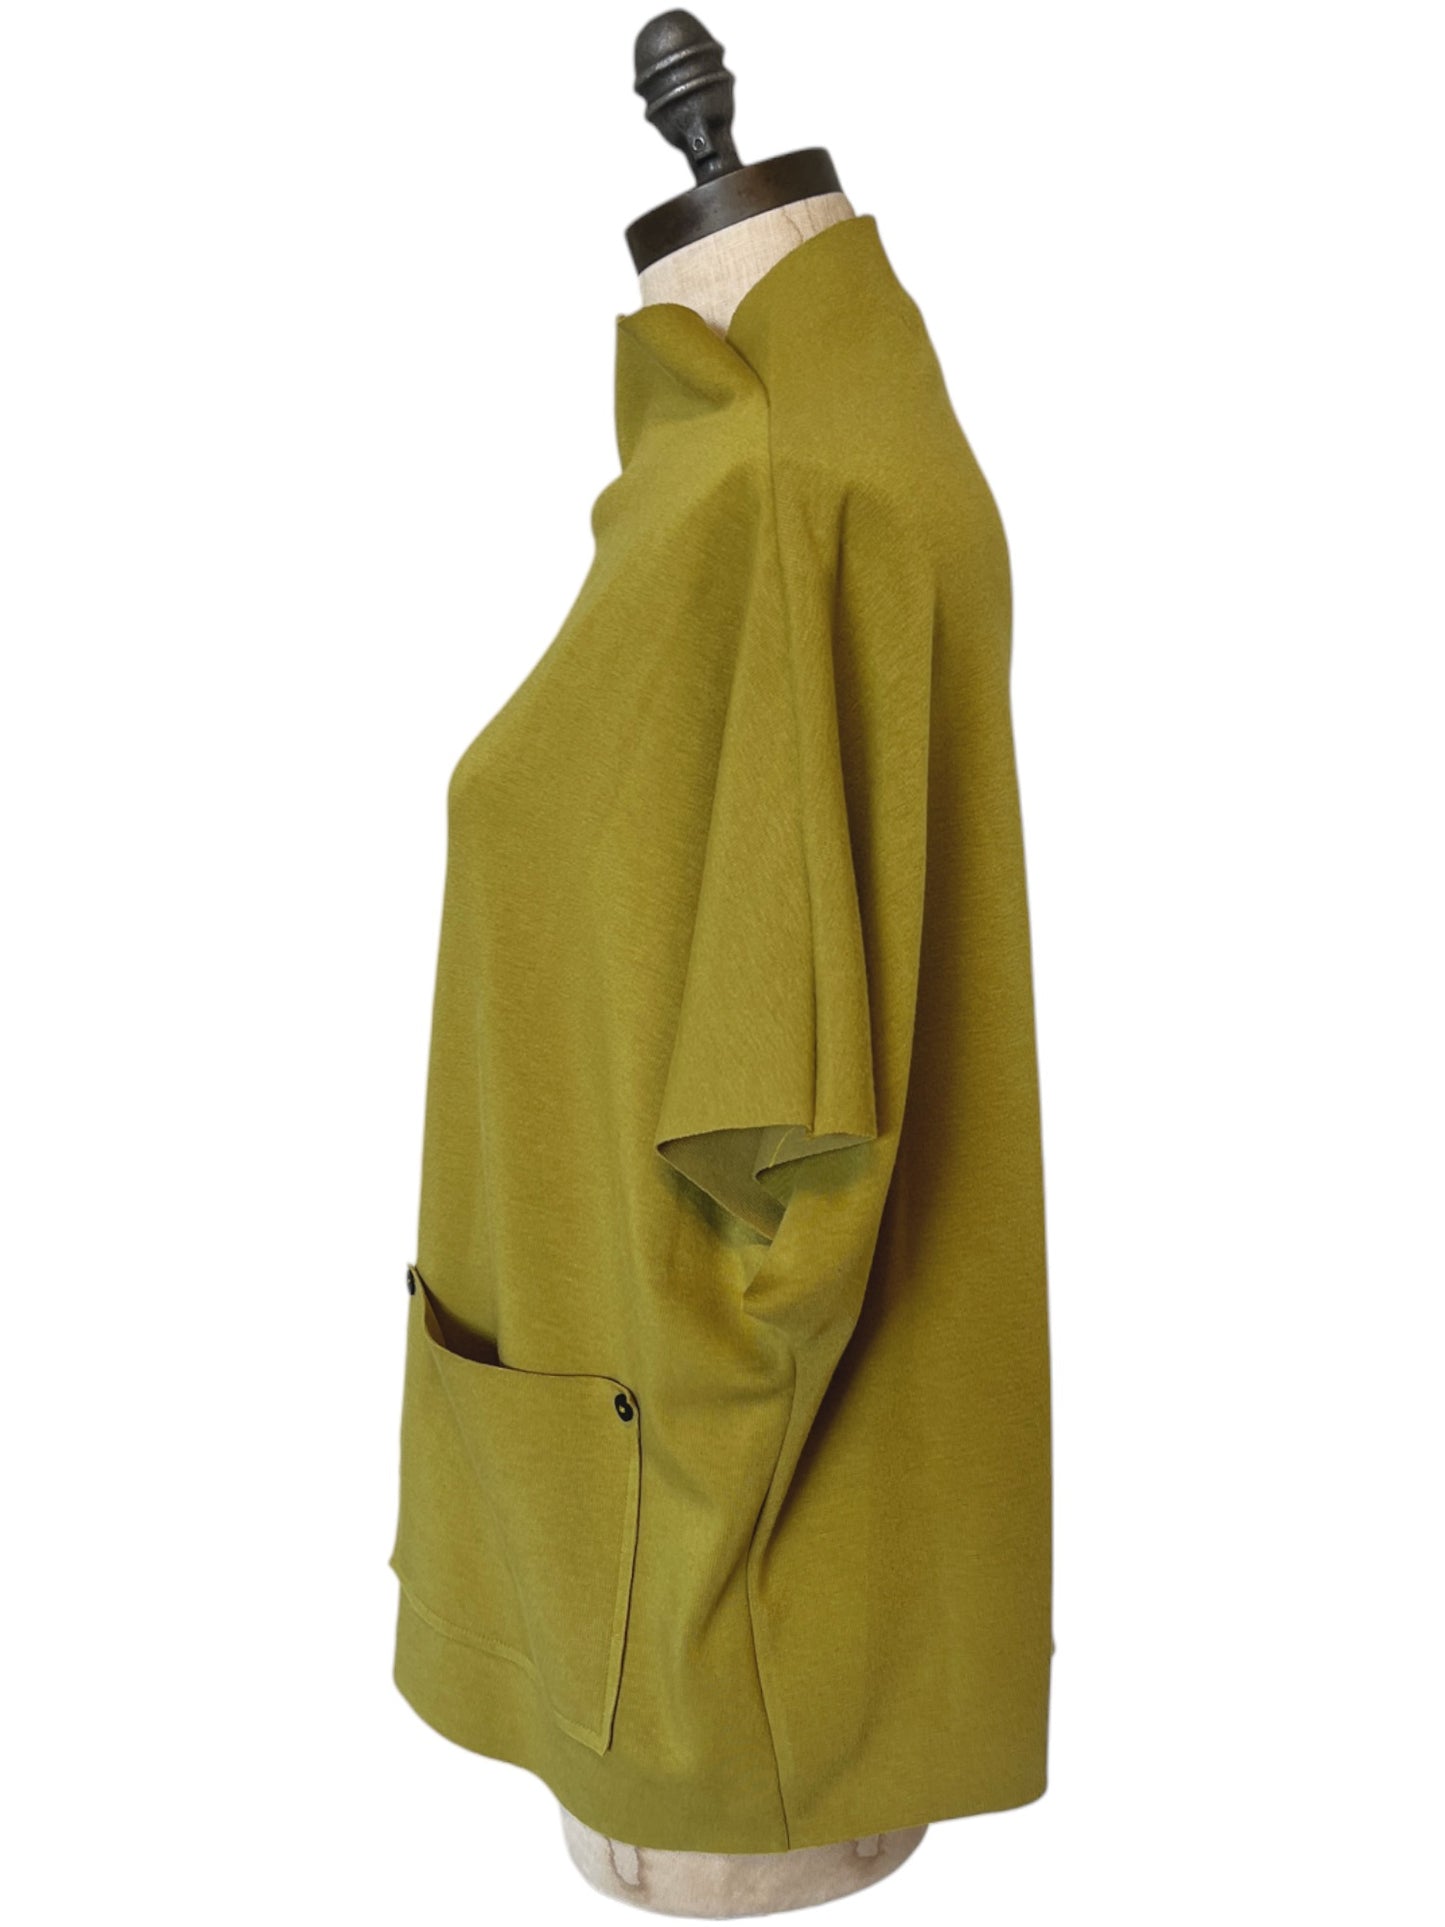 Boxy Pocket T in Chartreuse